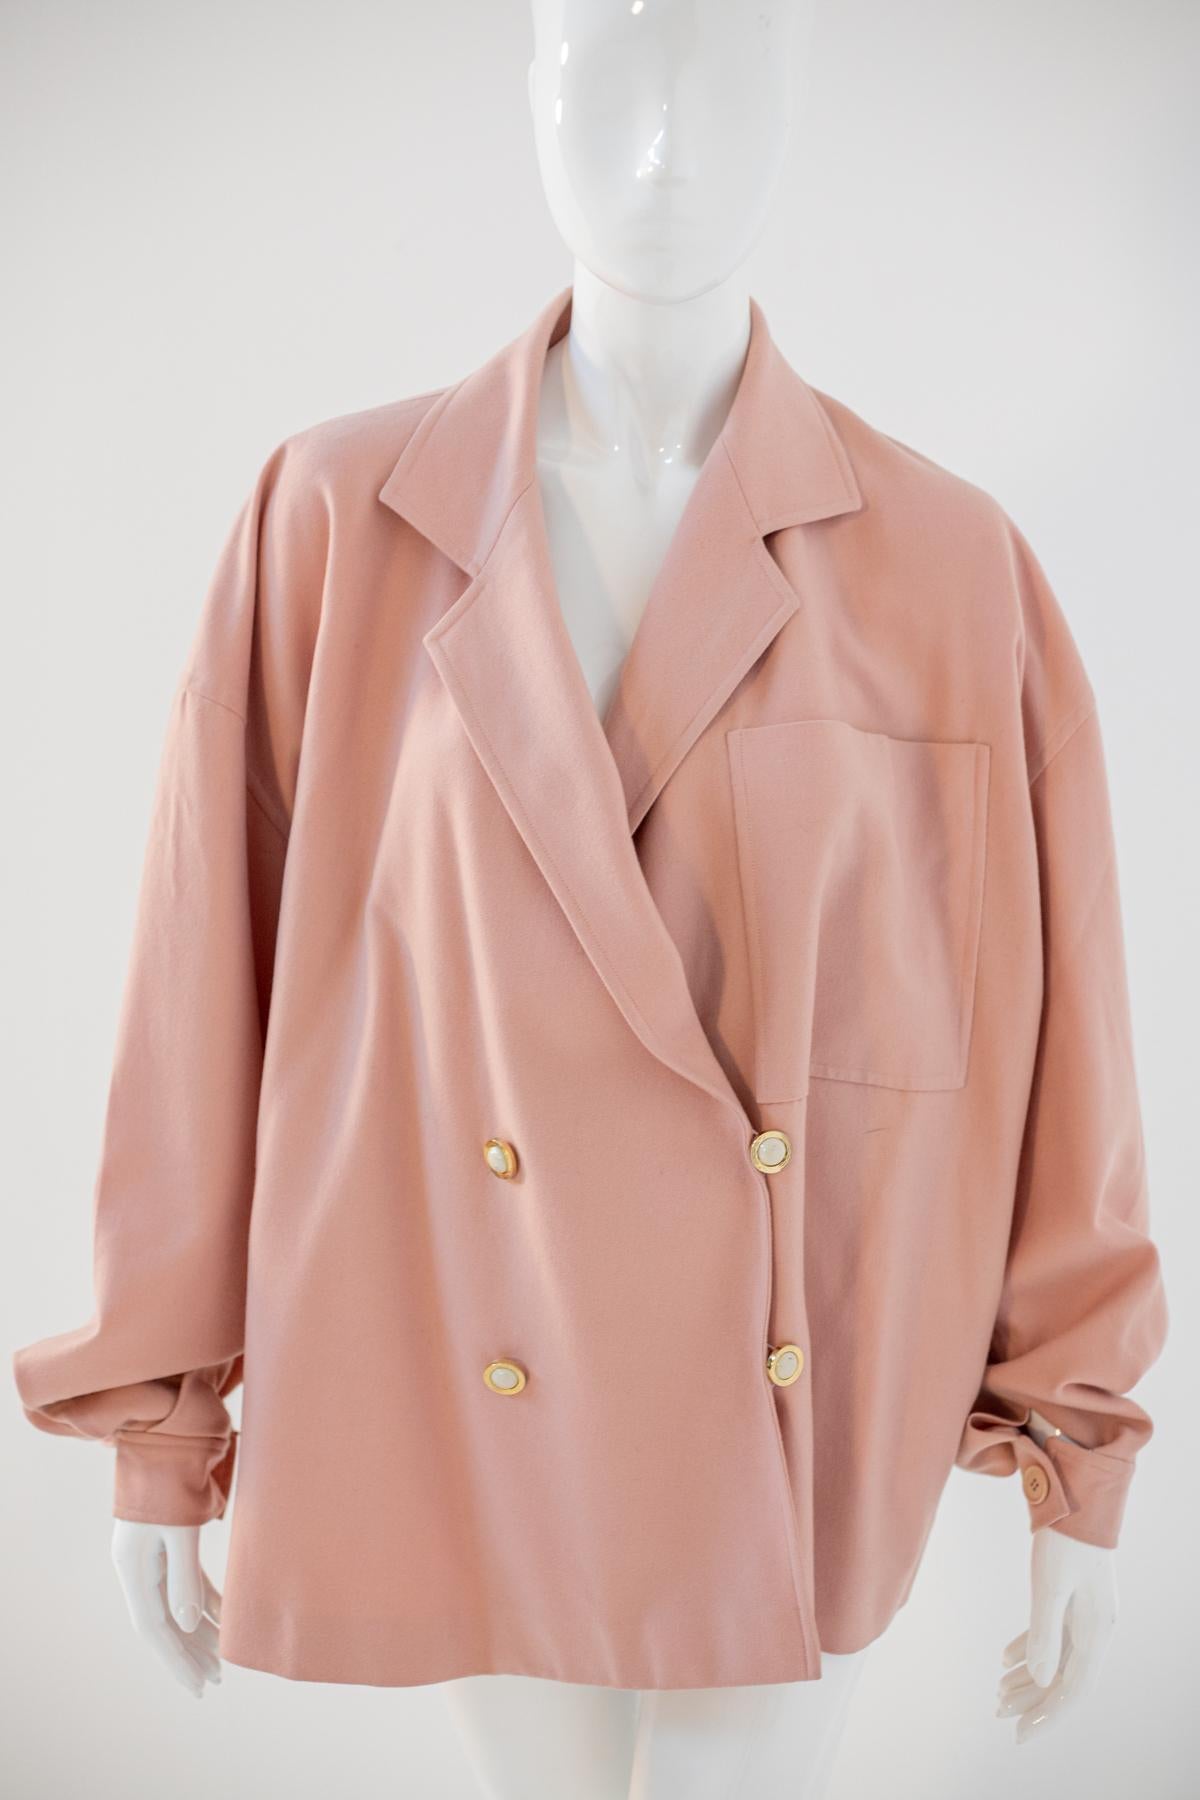 Irresistible pink double-breasted jacket by Gai Mattiolo from the 1990s, made in Italy. ORIGINAL LABEL.
The jacket is totally made of pink wool, with a collar with a long and deep list cut, which connects to the central part of the jacket with two